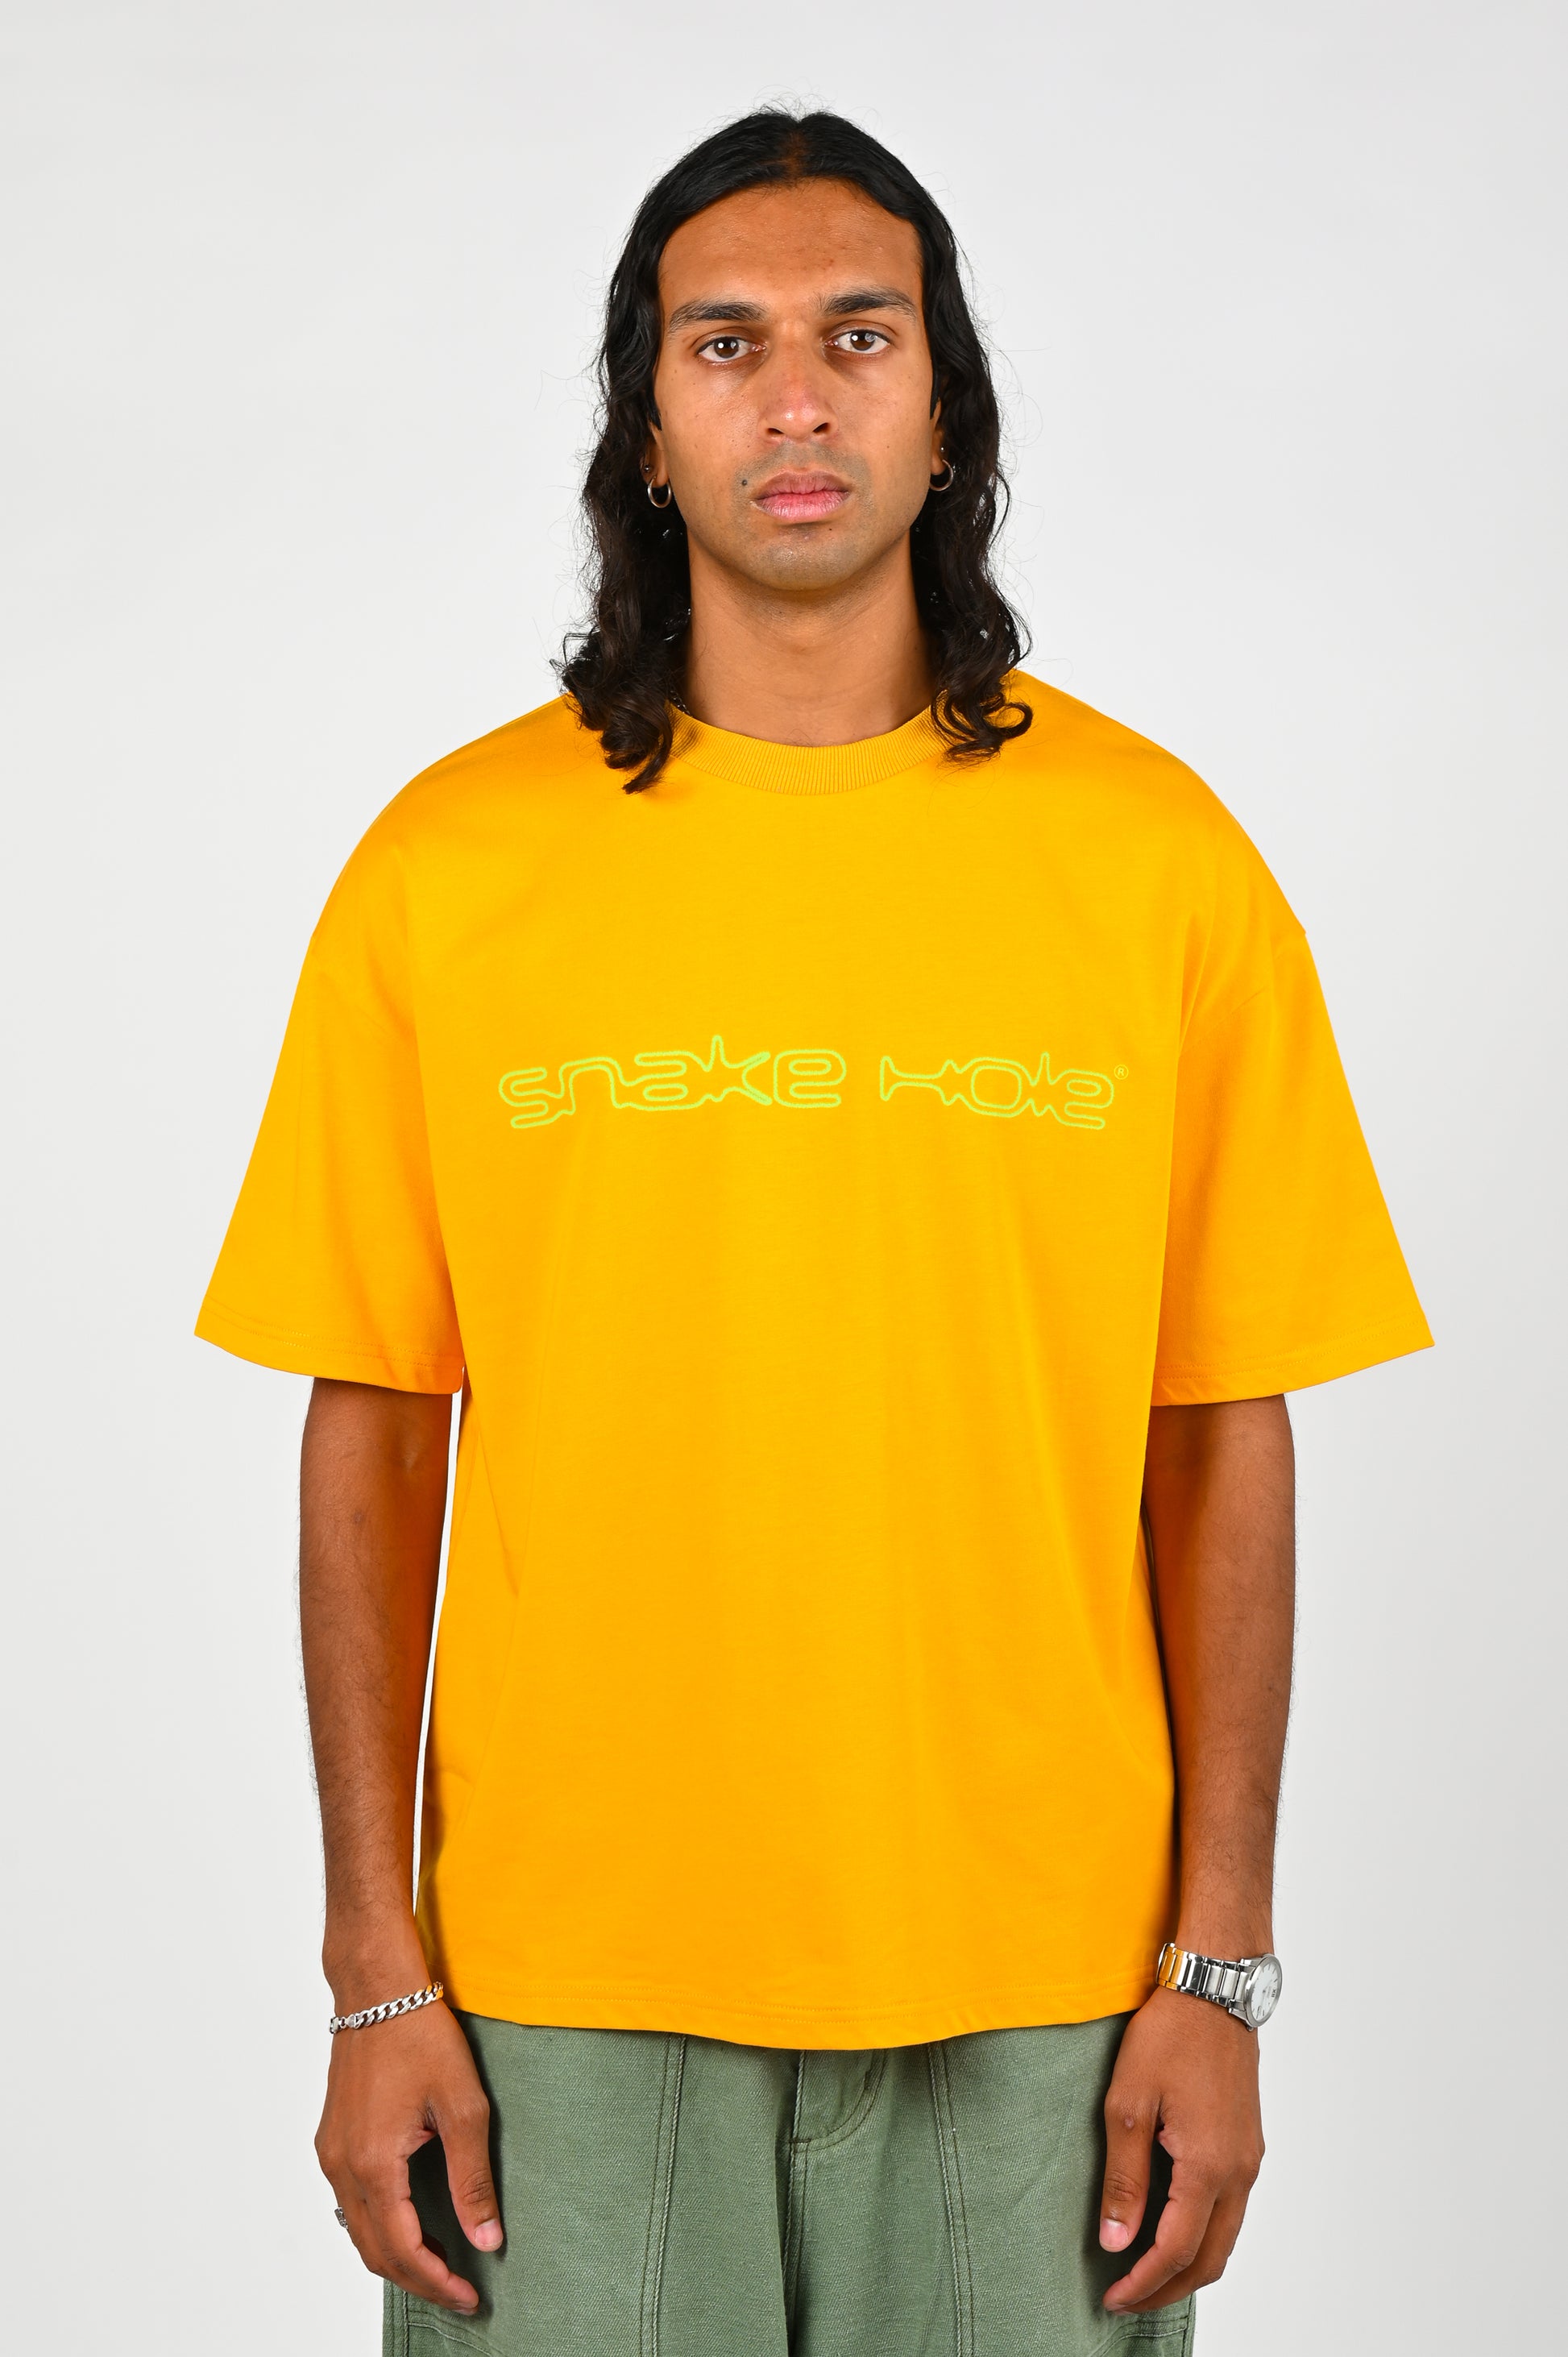 The Snake Hole 'Outta Space' Tee in Gold